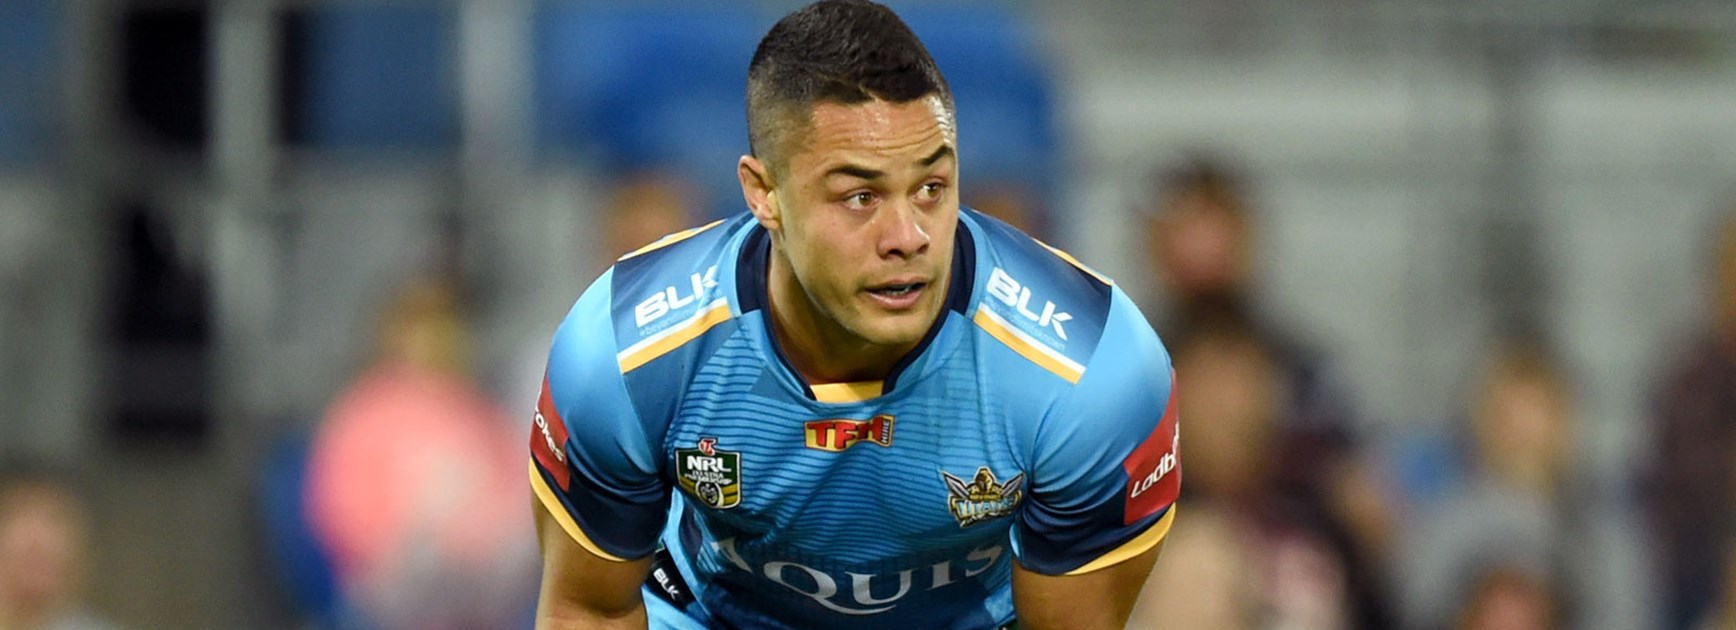 Jarryd Hayne played his first game at fullback for the Titans in Round 25.